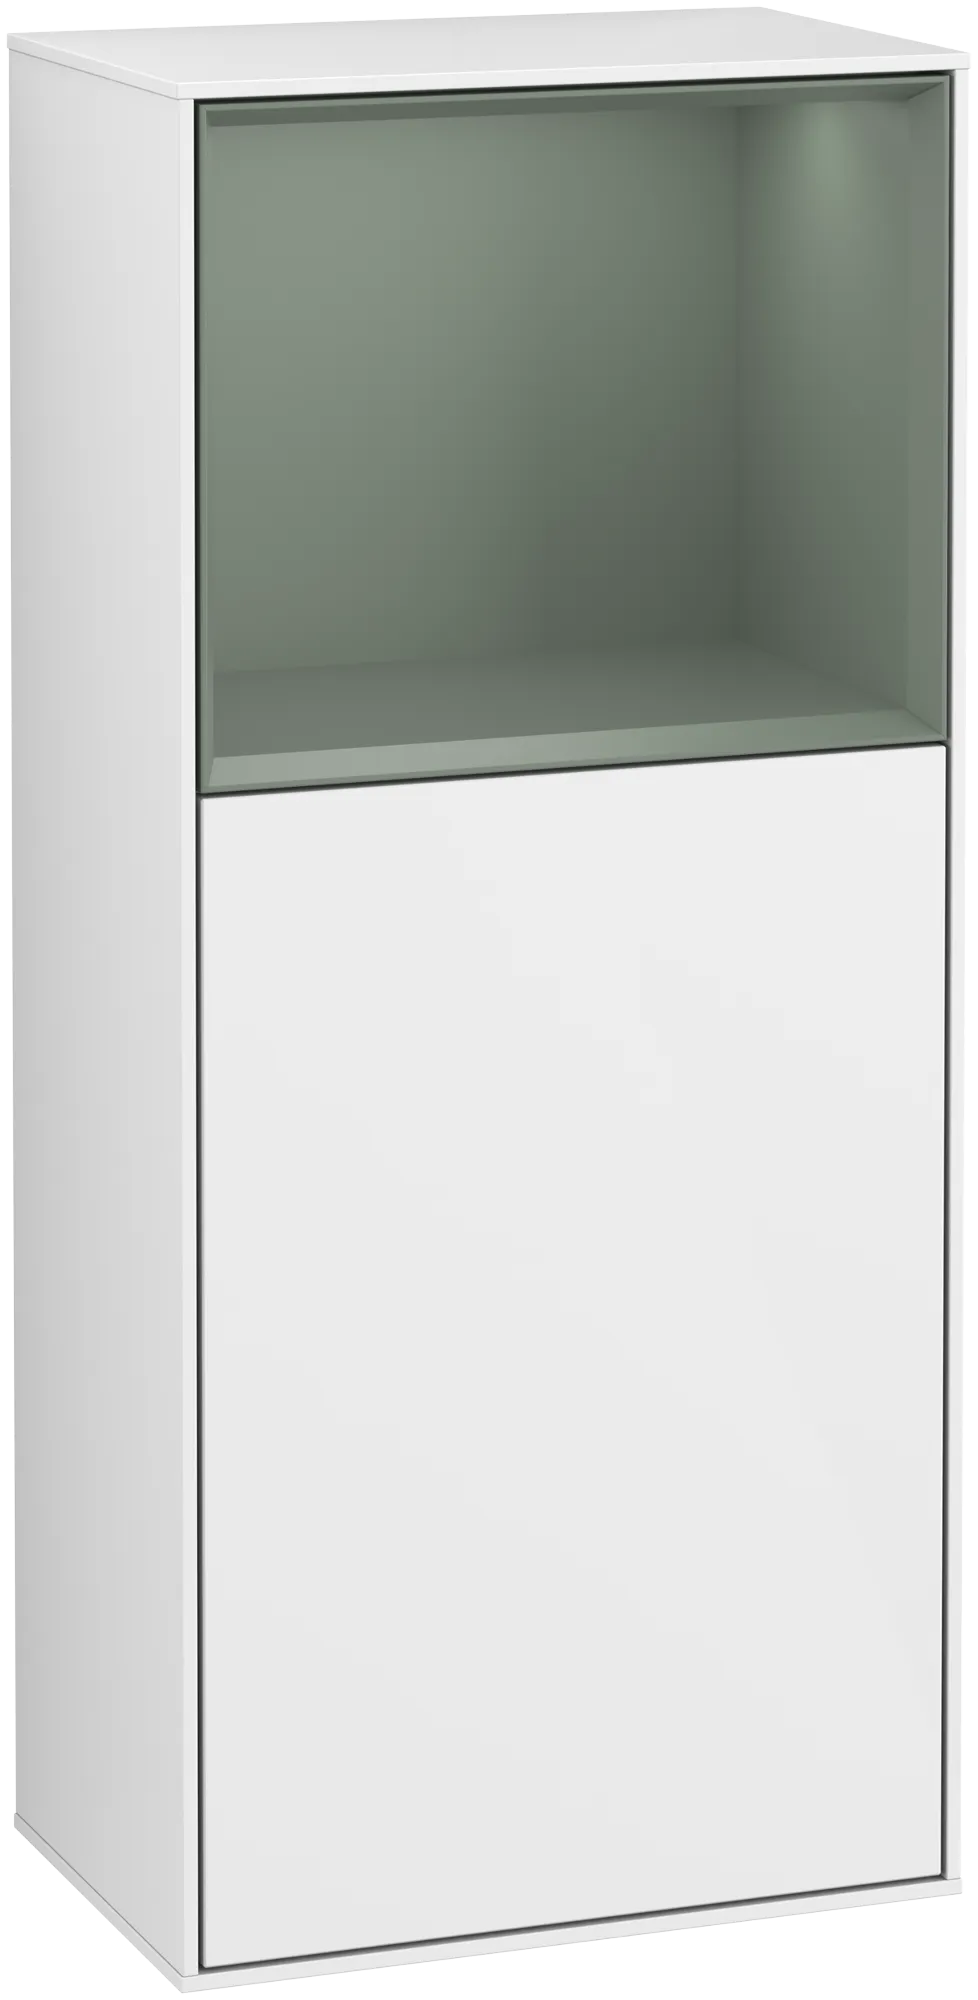 Picture of VILLEROY BOCH Finion Side cabinet, with lighting, 1 door, 418 x 936 x 270 mm, Glossy White Lacquer / Olive Matt Lacquer #G510GMGF